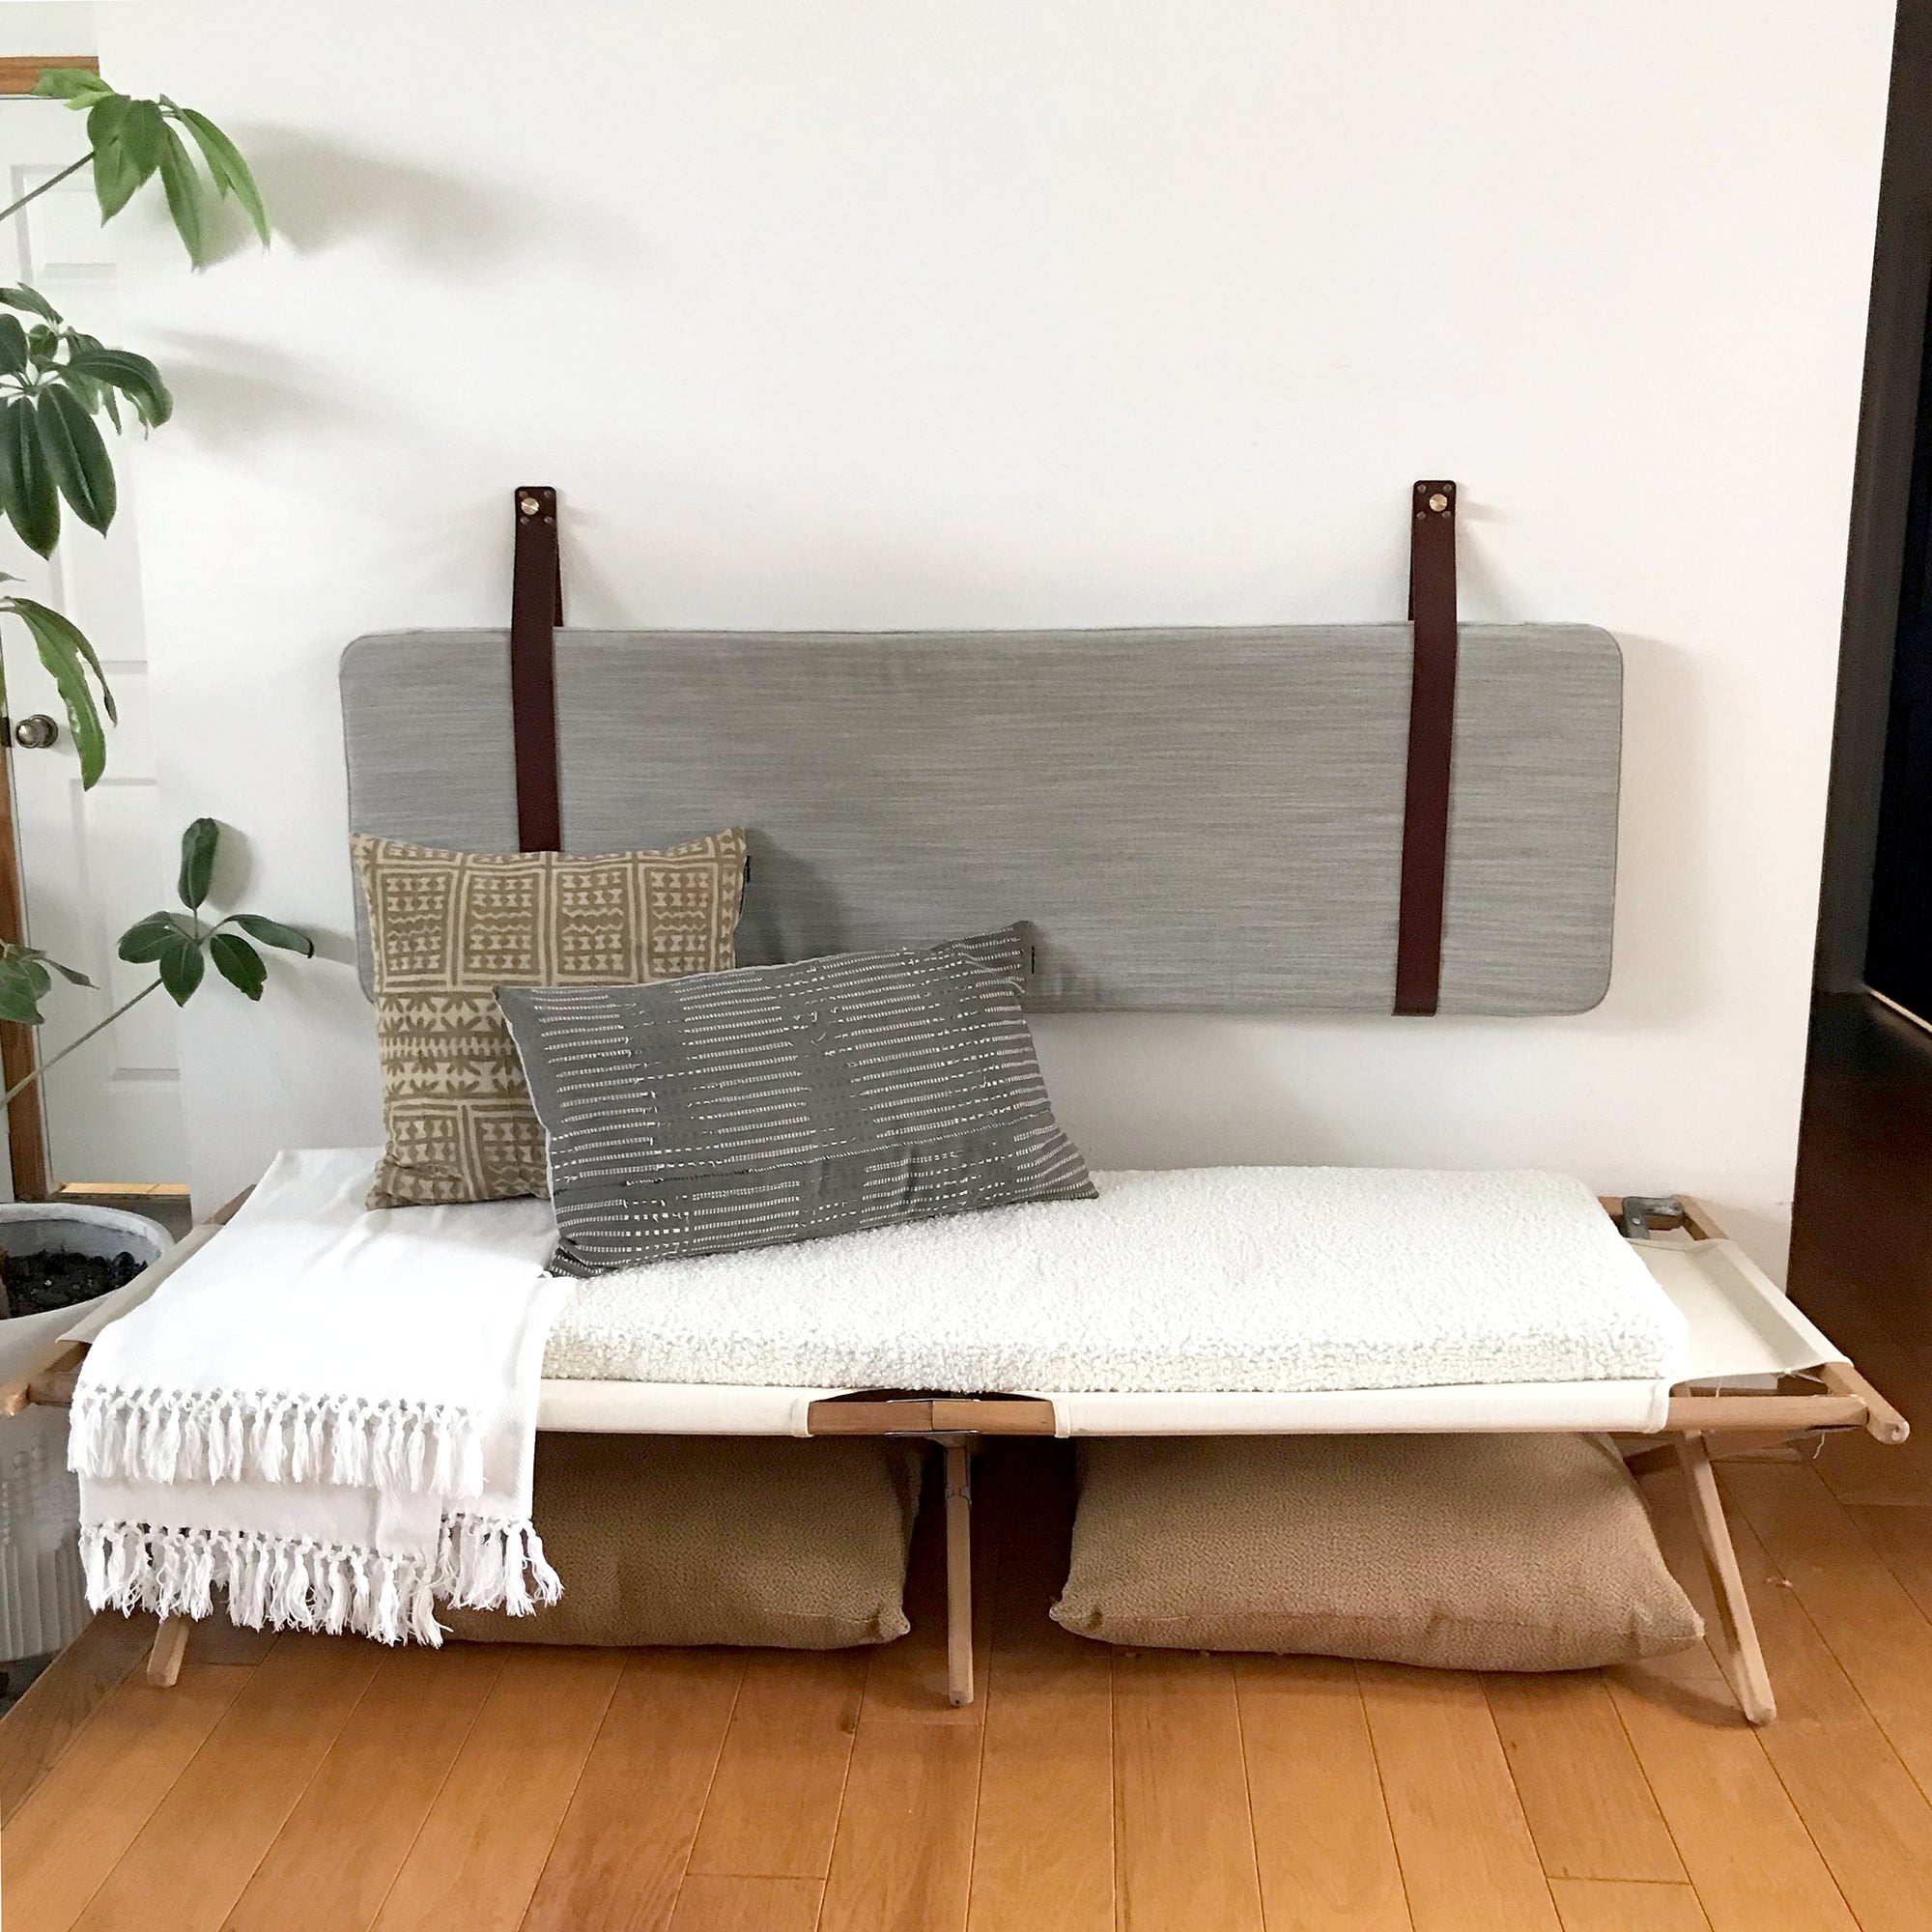 Light Gray Denim - Wall Hung Headboard Backrest Cushion with Leather Straps